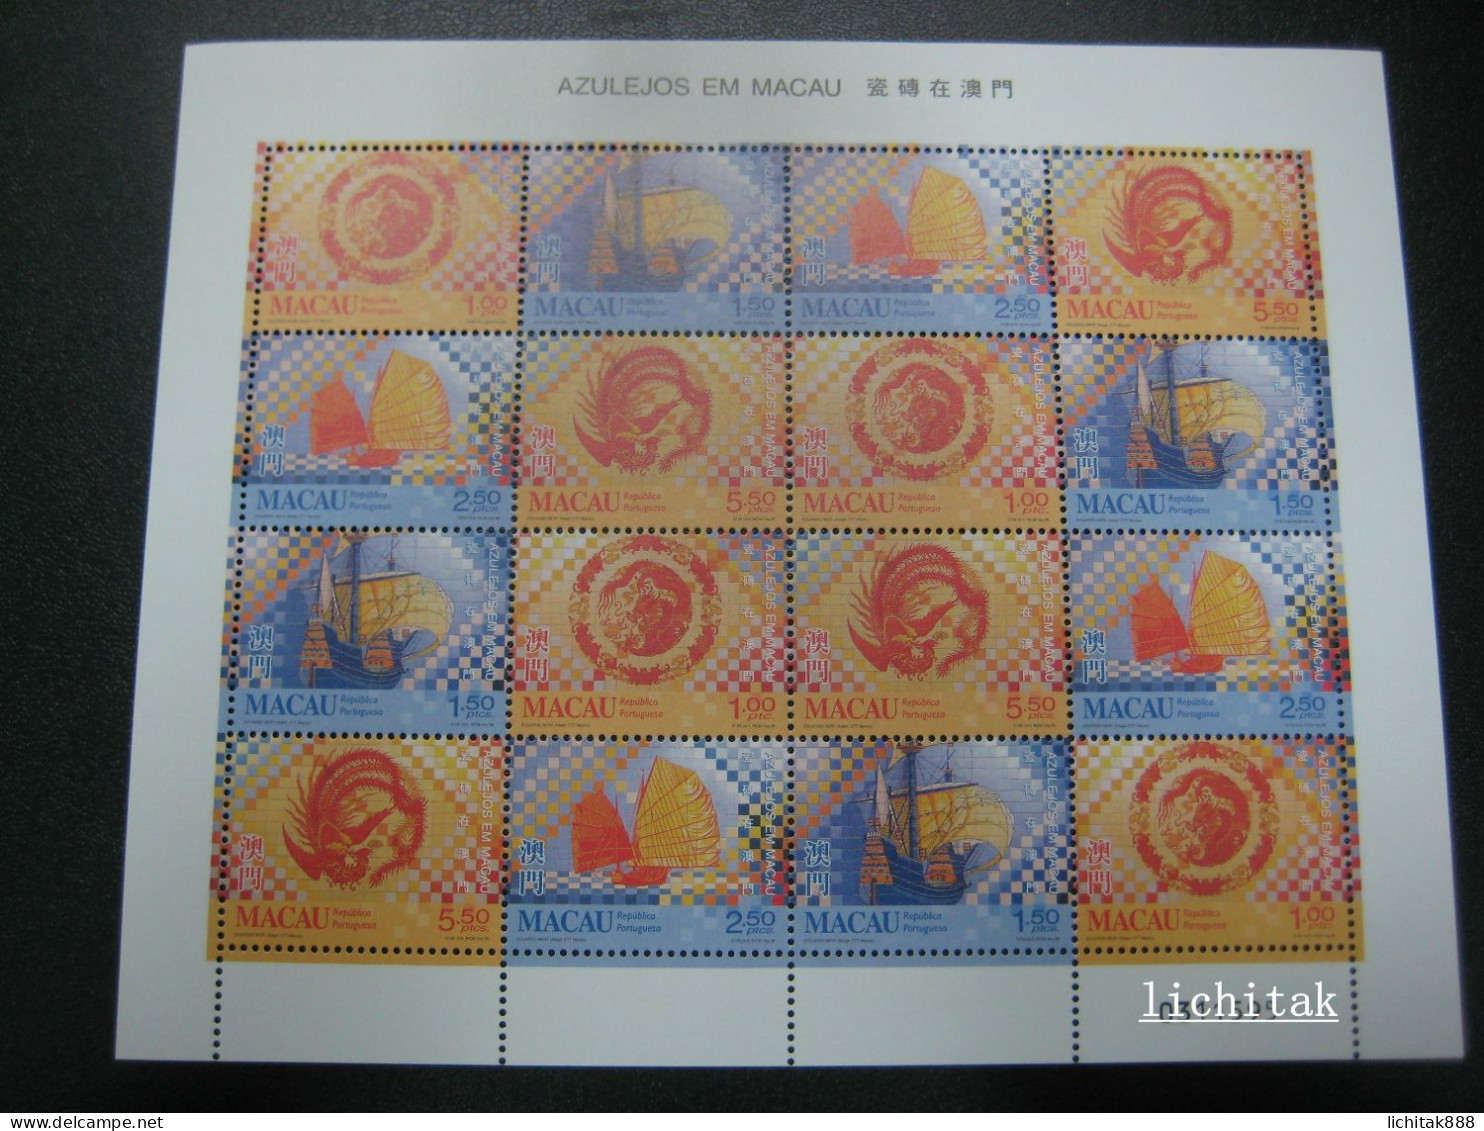 MACAU MACAO 1998 TILES IN MACAO STAMPS MINI PANE / SHEET MNH - Unused Stamps